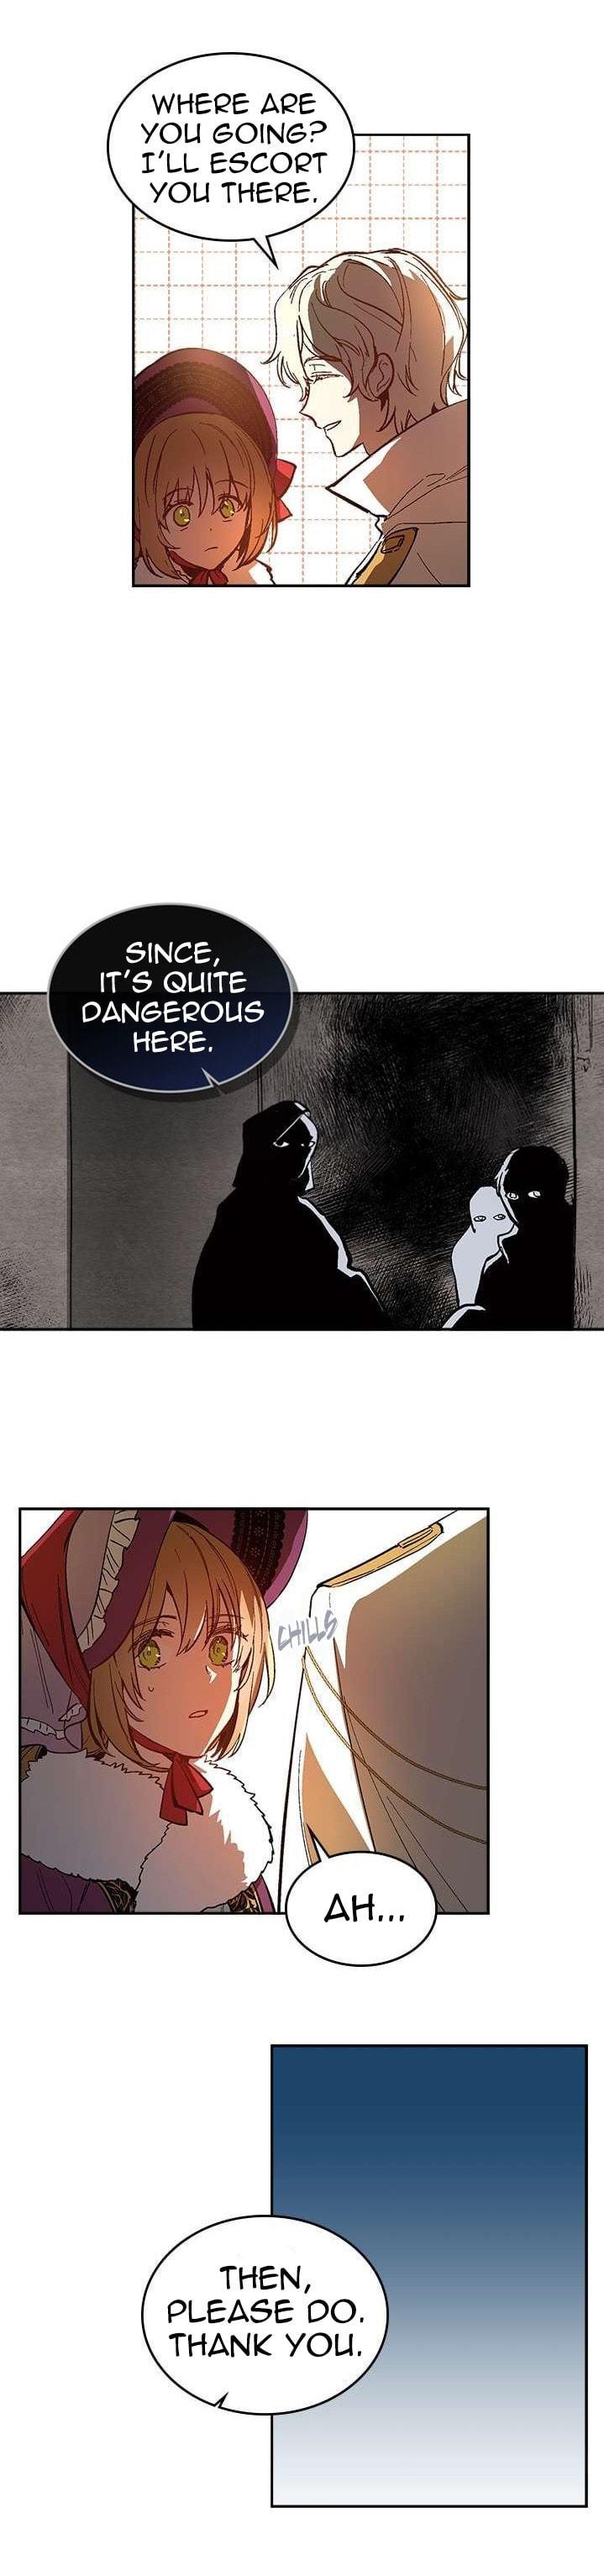 The Reason Why Raeliana Ended Up At The Duke’S Mansion - Page 4